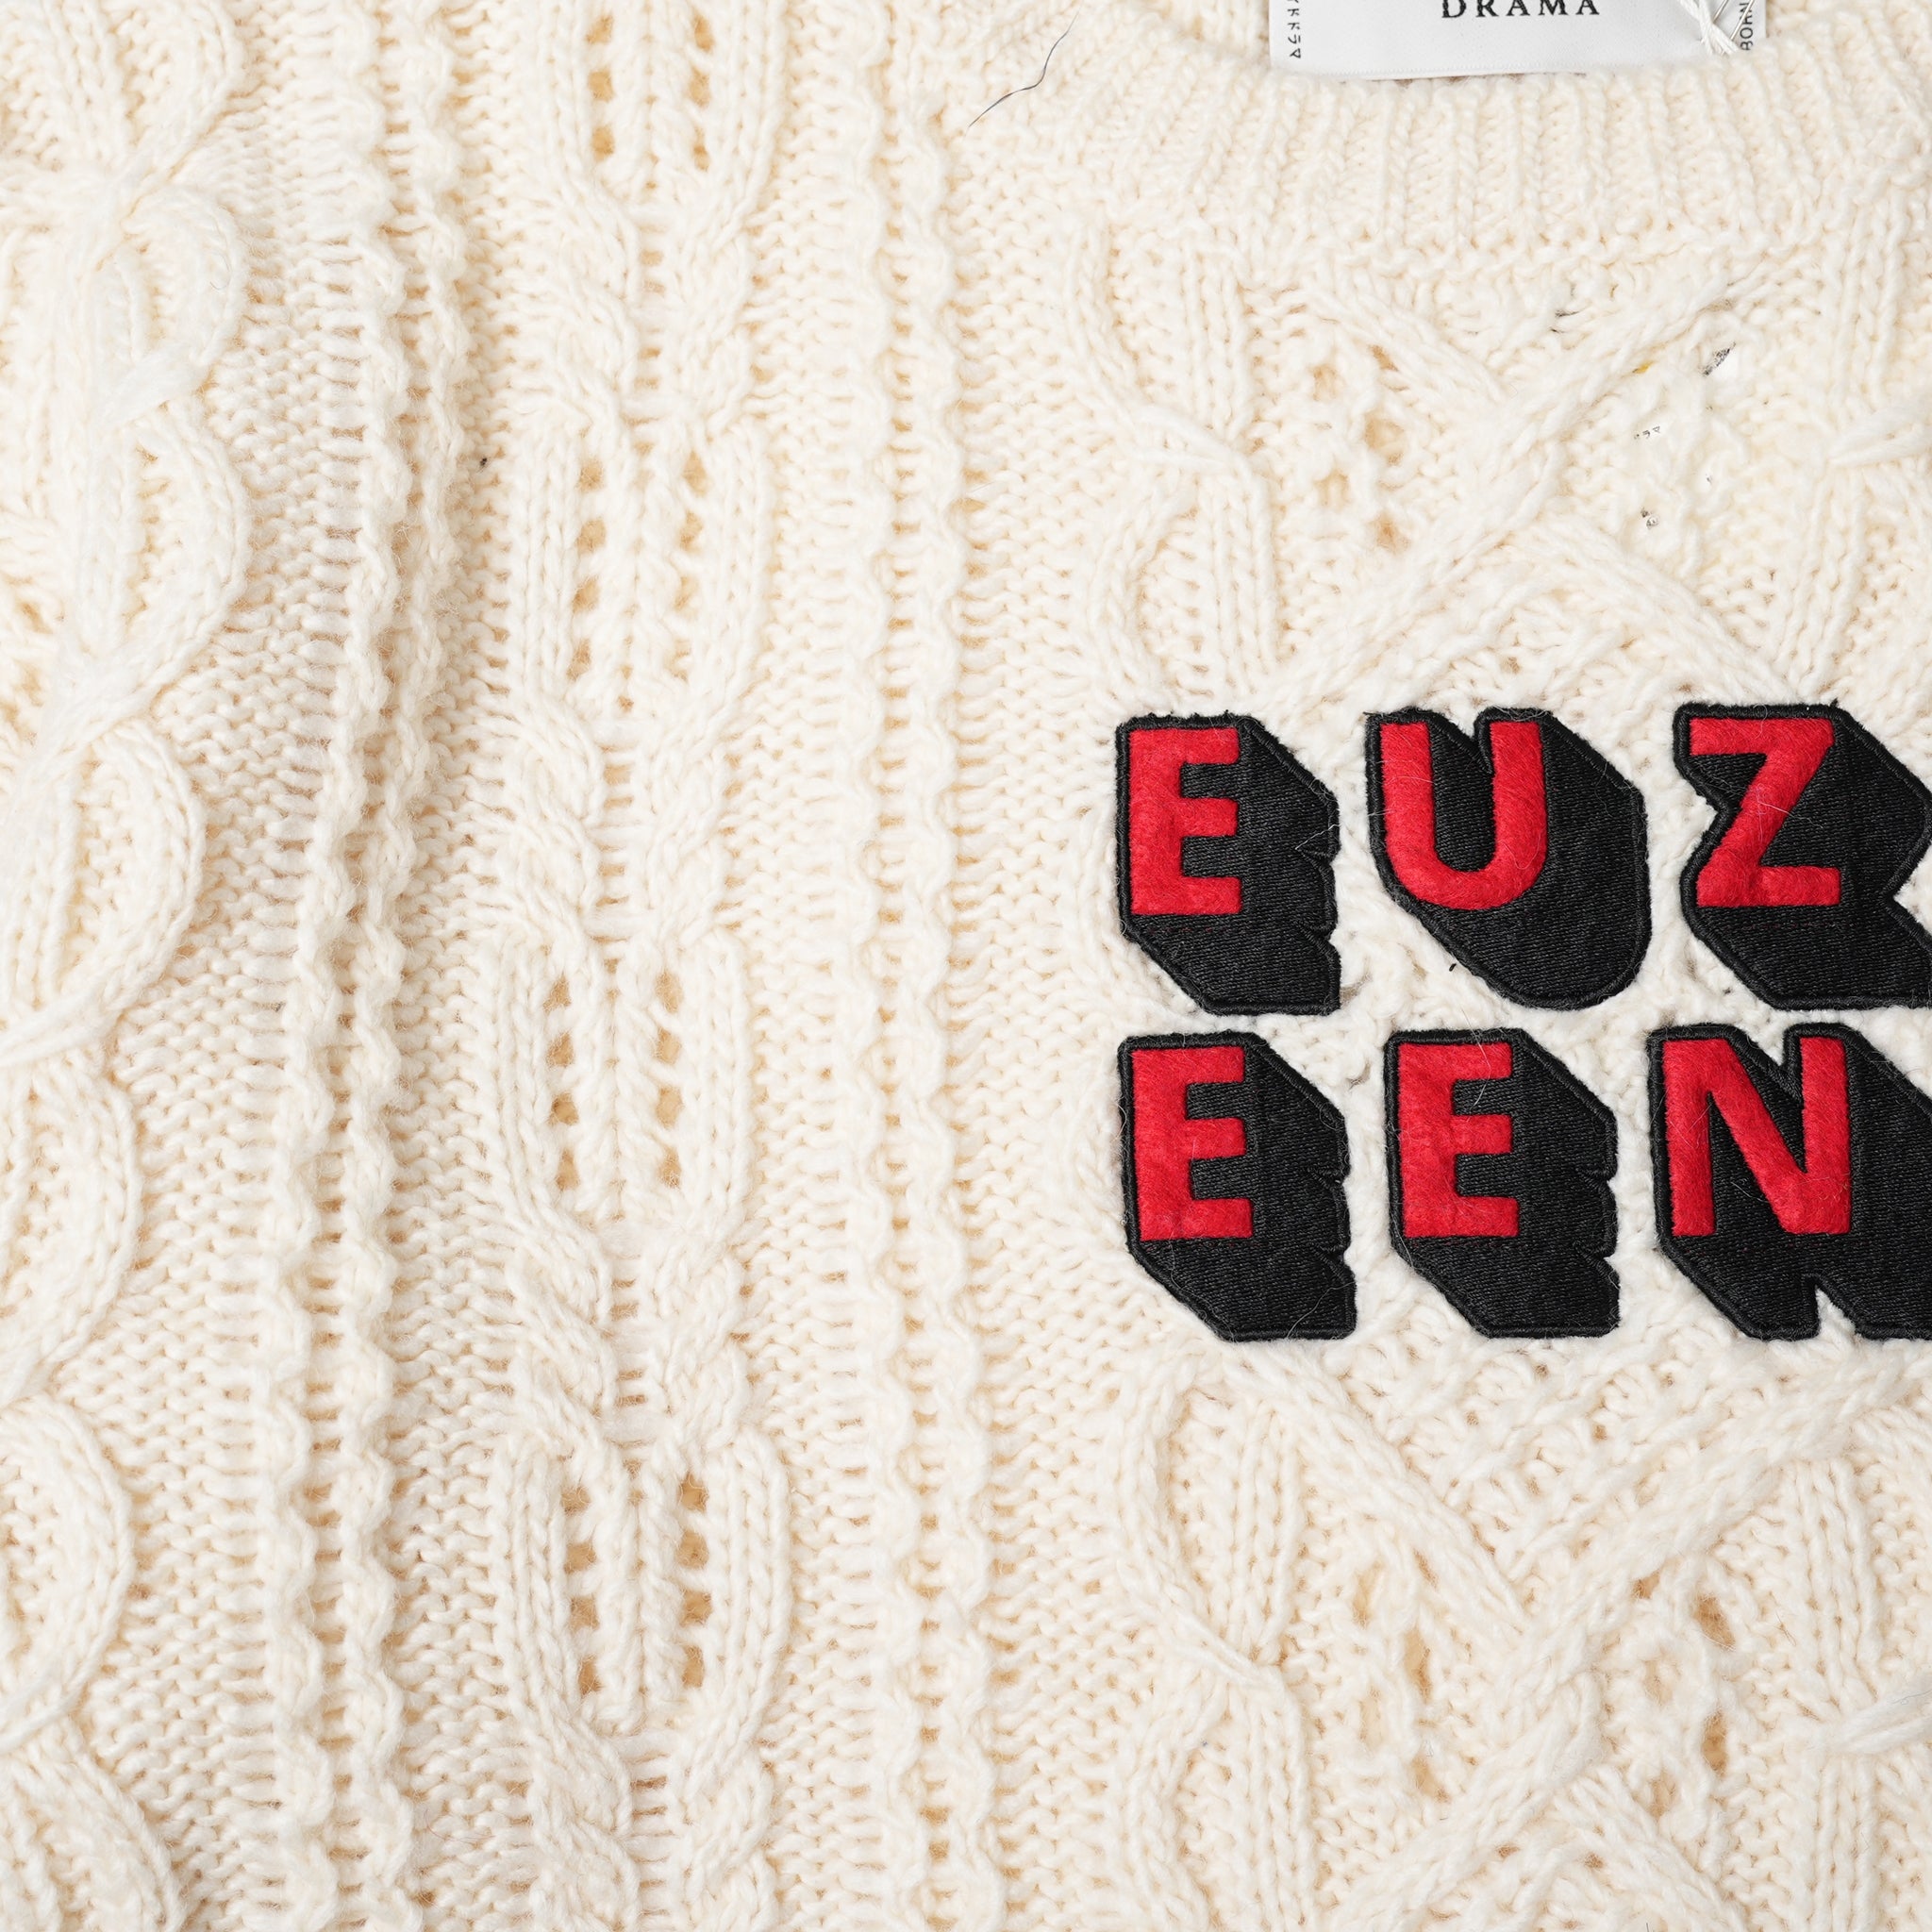 No:bsd23AW-16 | Name:EUZEEN Mix Knit Sweater | Color:Off White